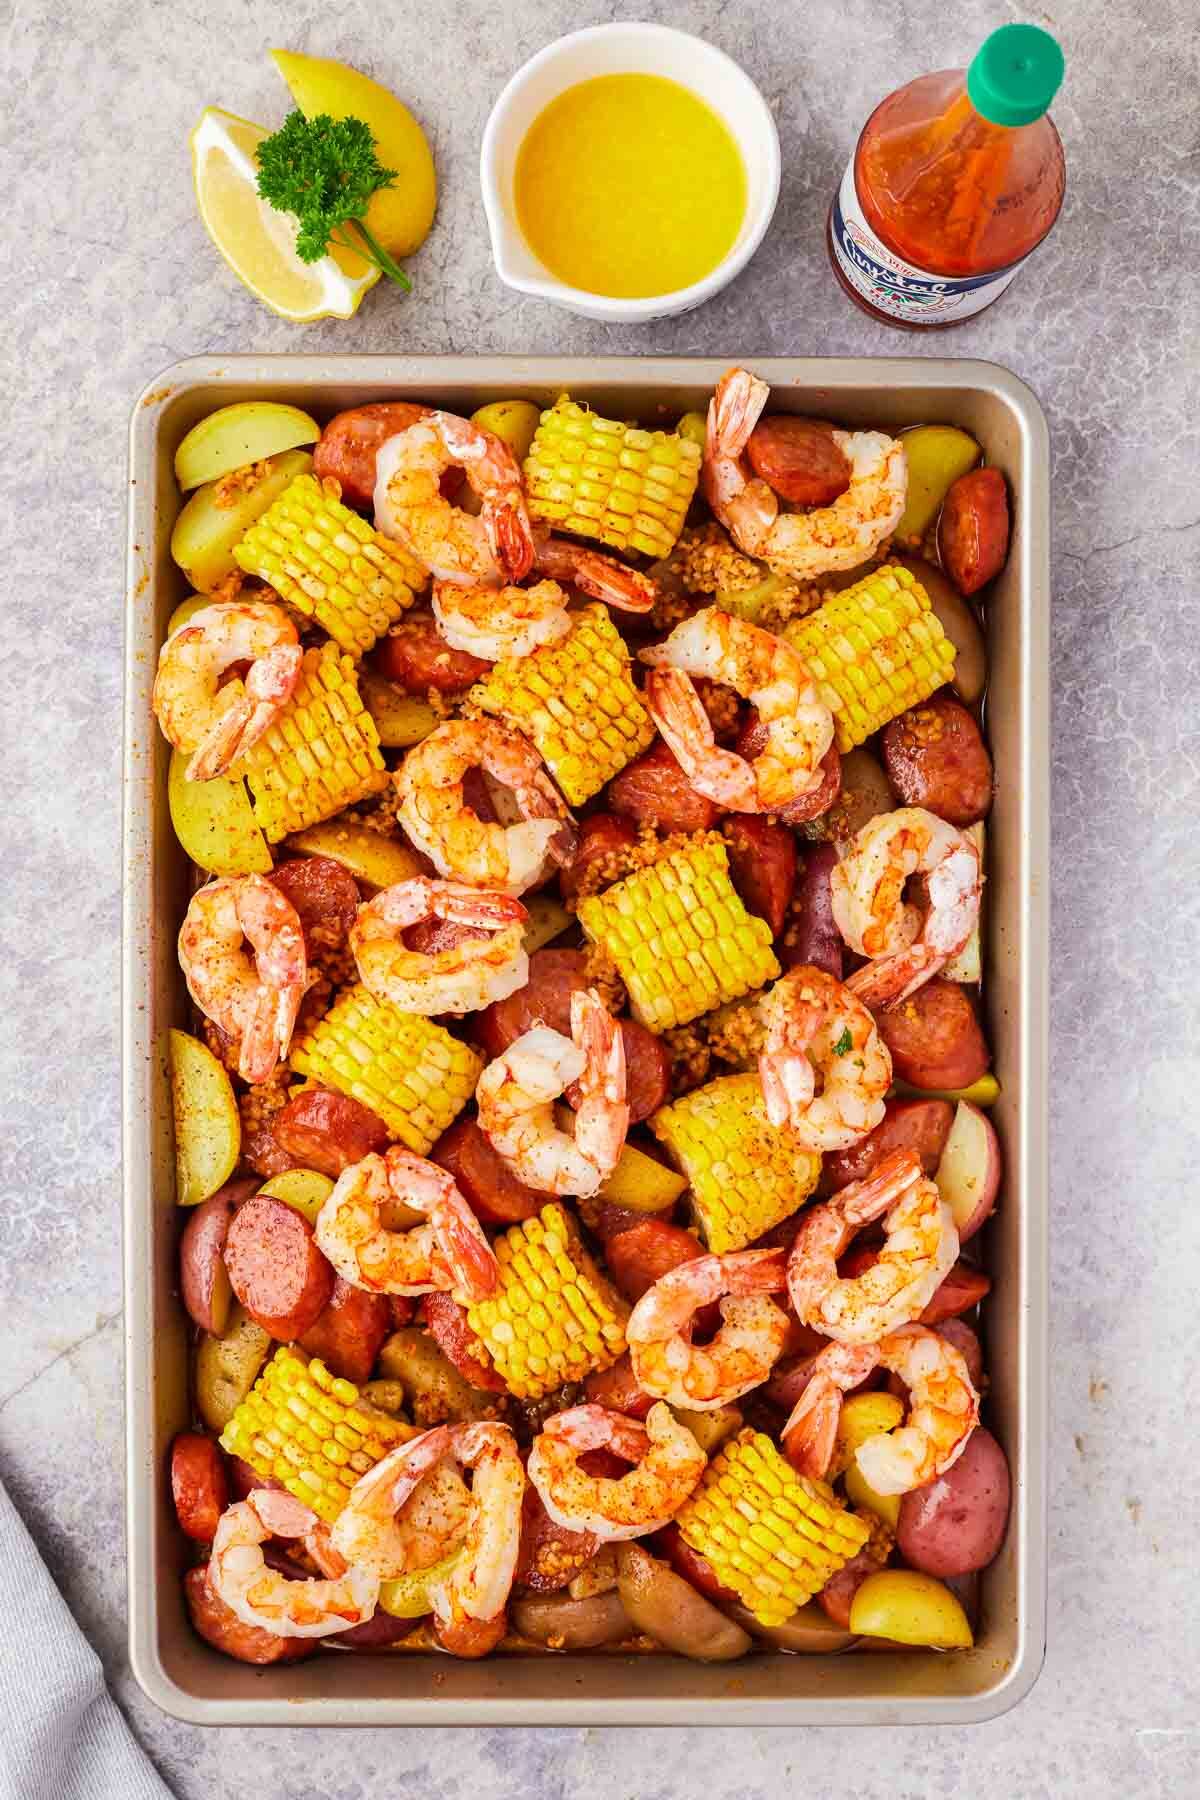 Sheet pan shrimp boil cooked in the oven with shrimp, sausage corn and potatoes.